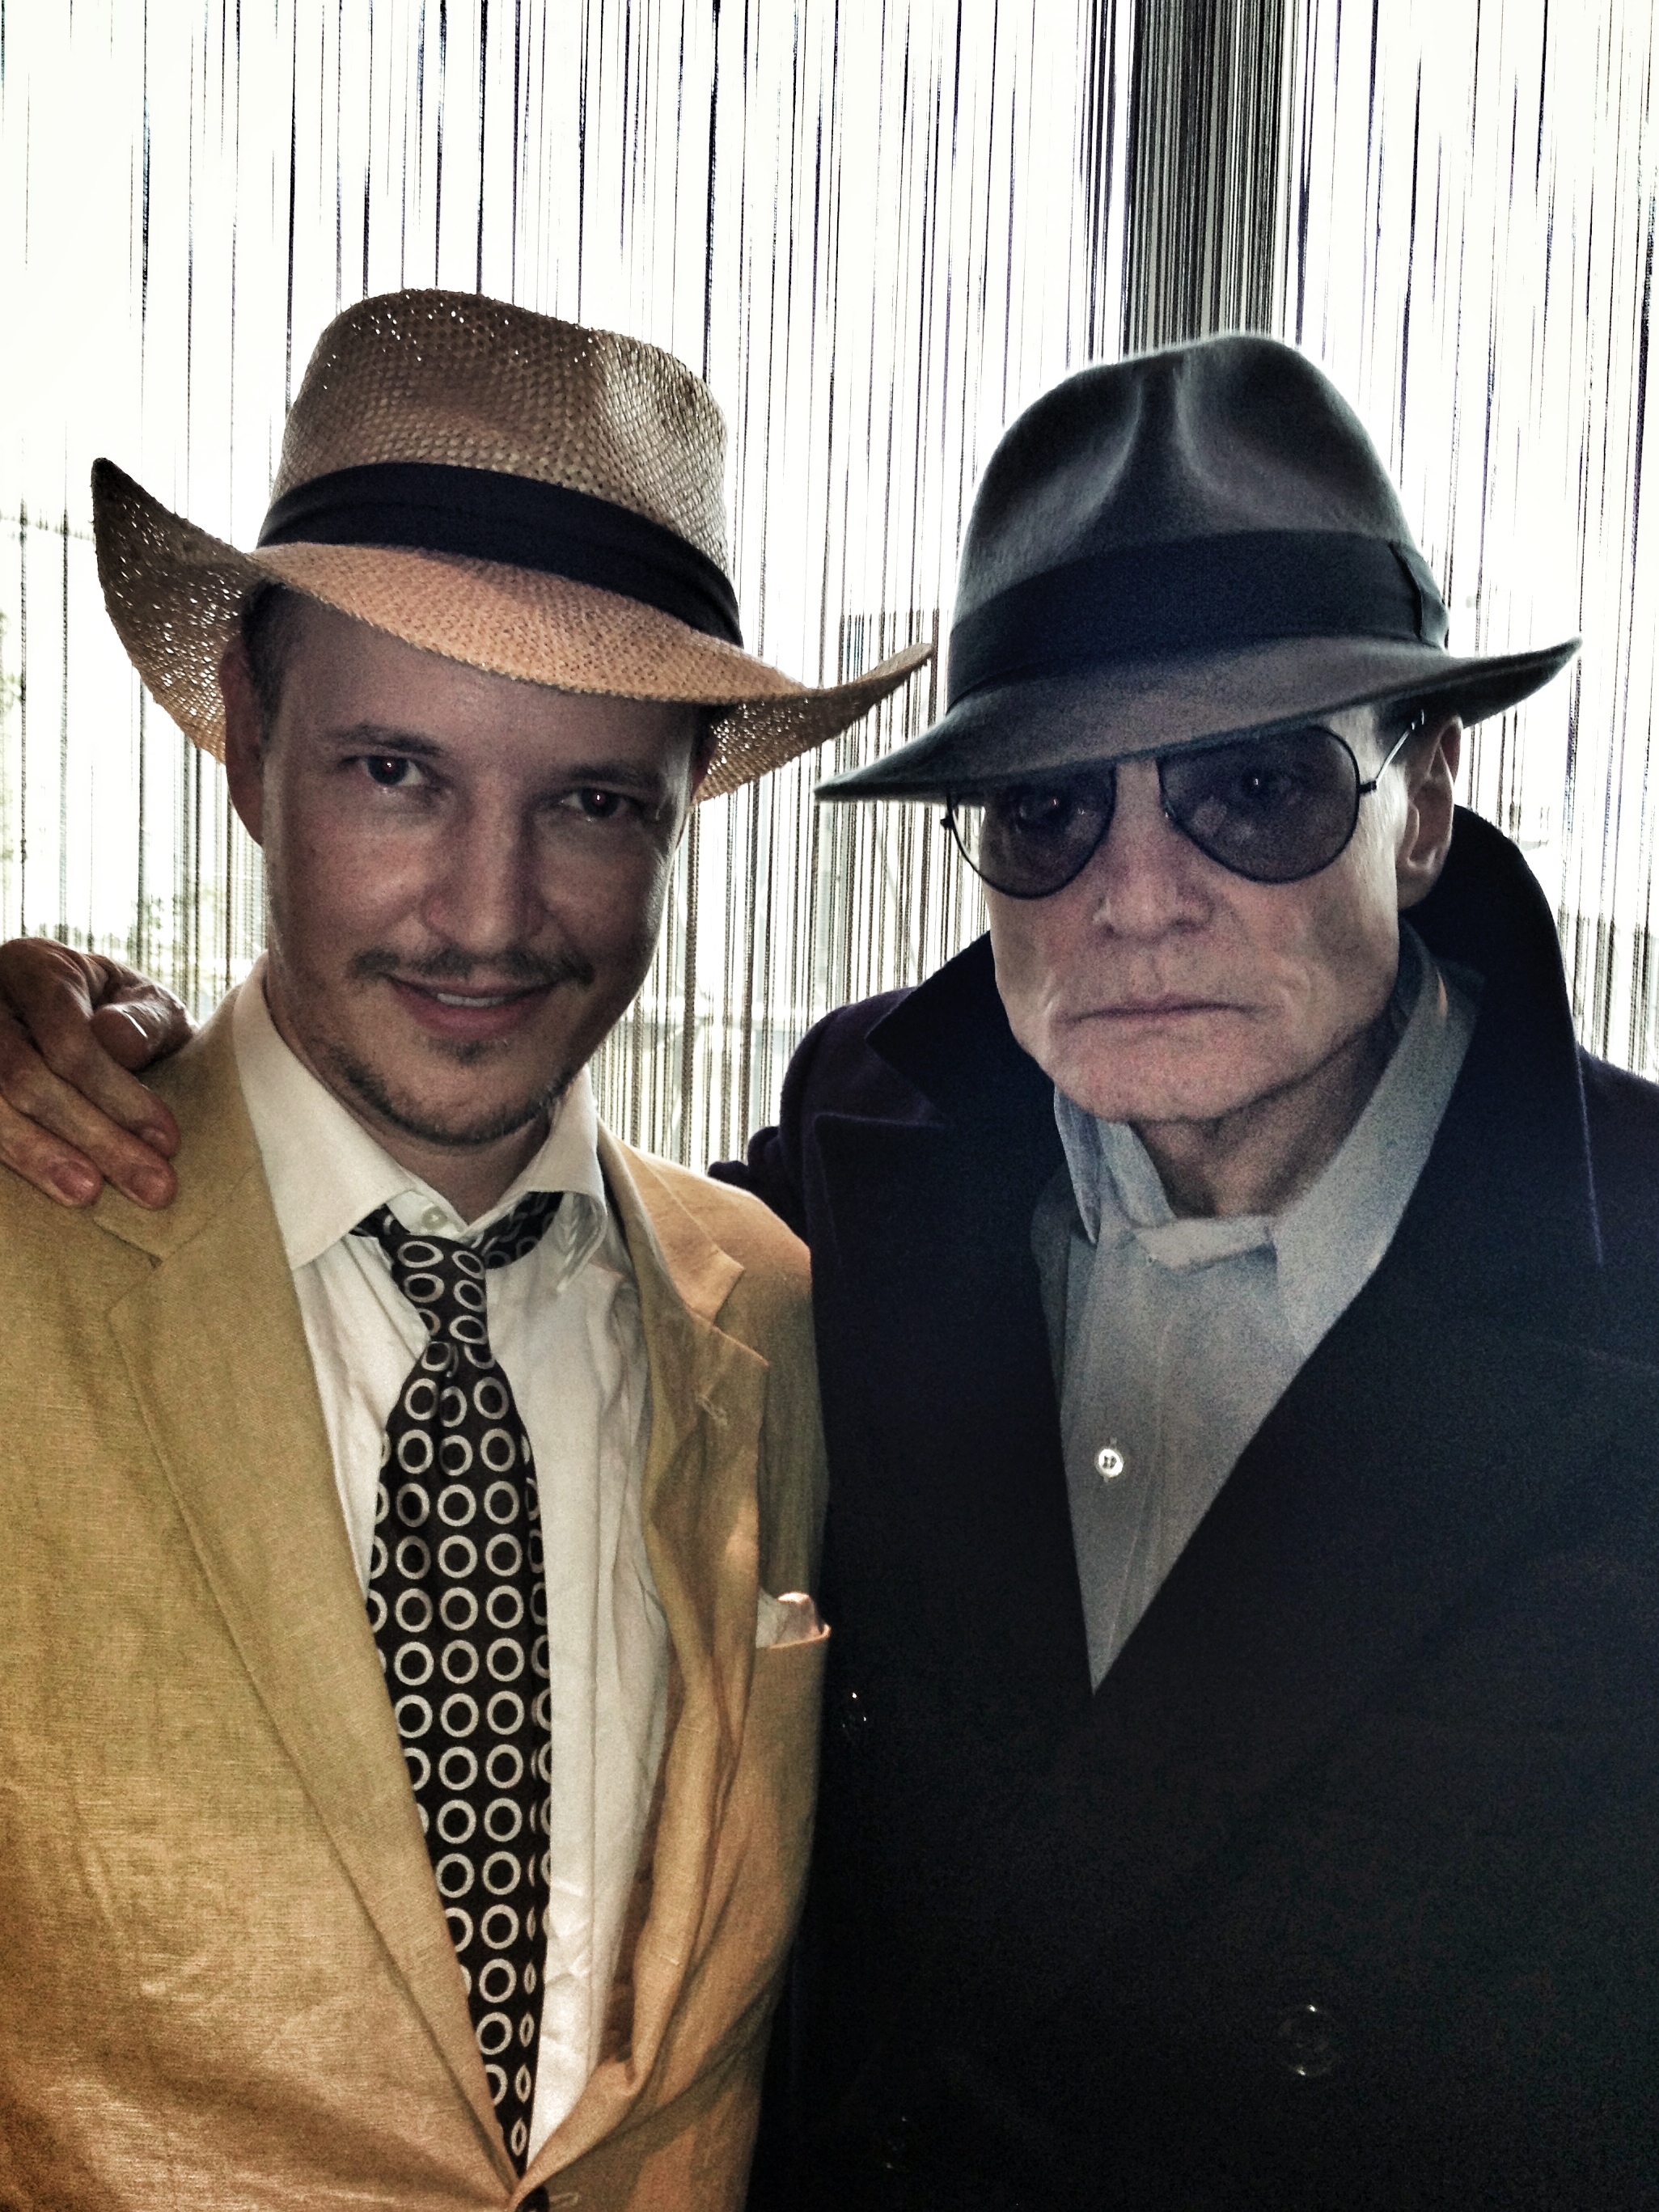 Tom Six and Dieter Laser